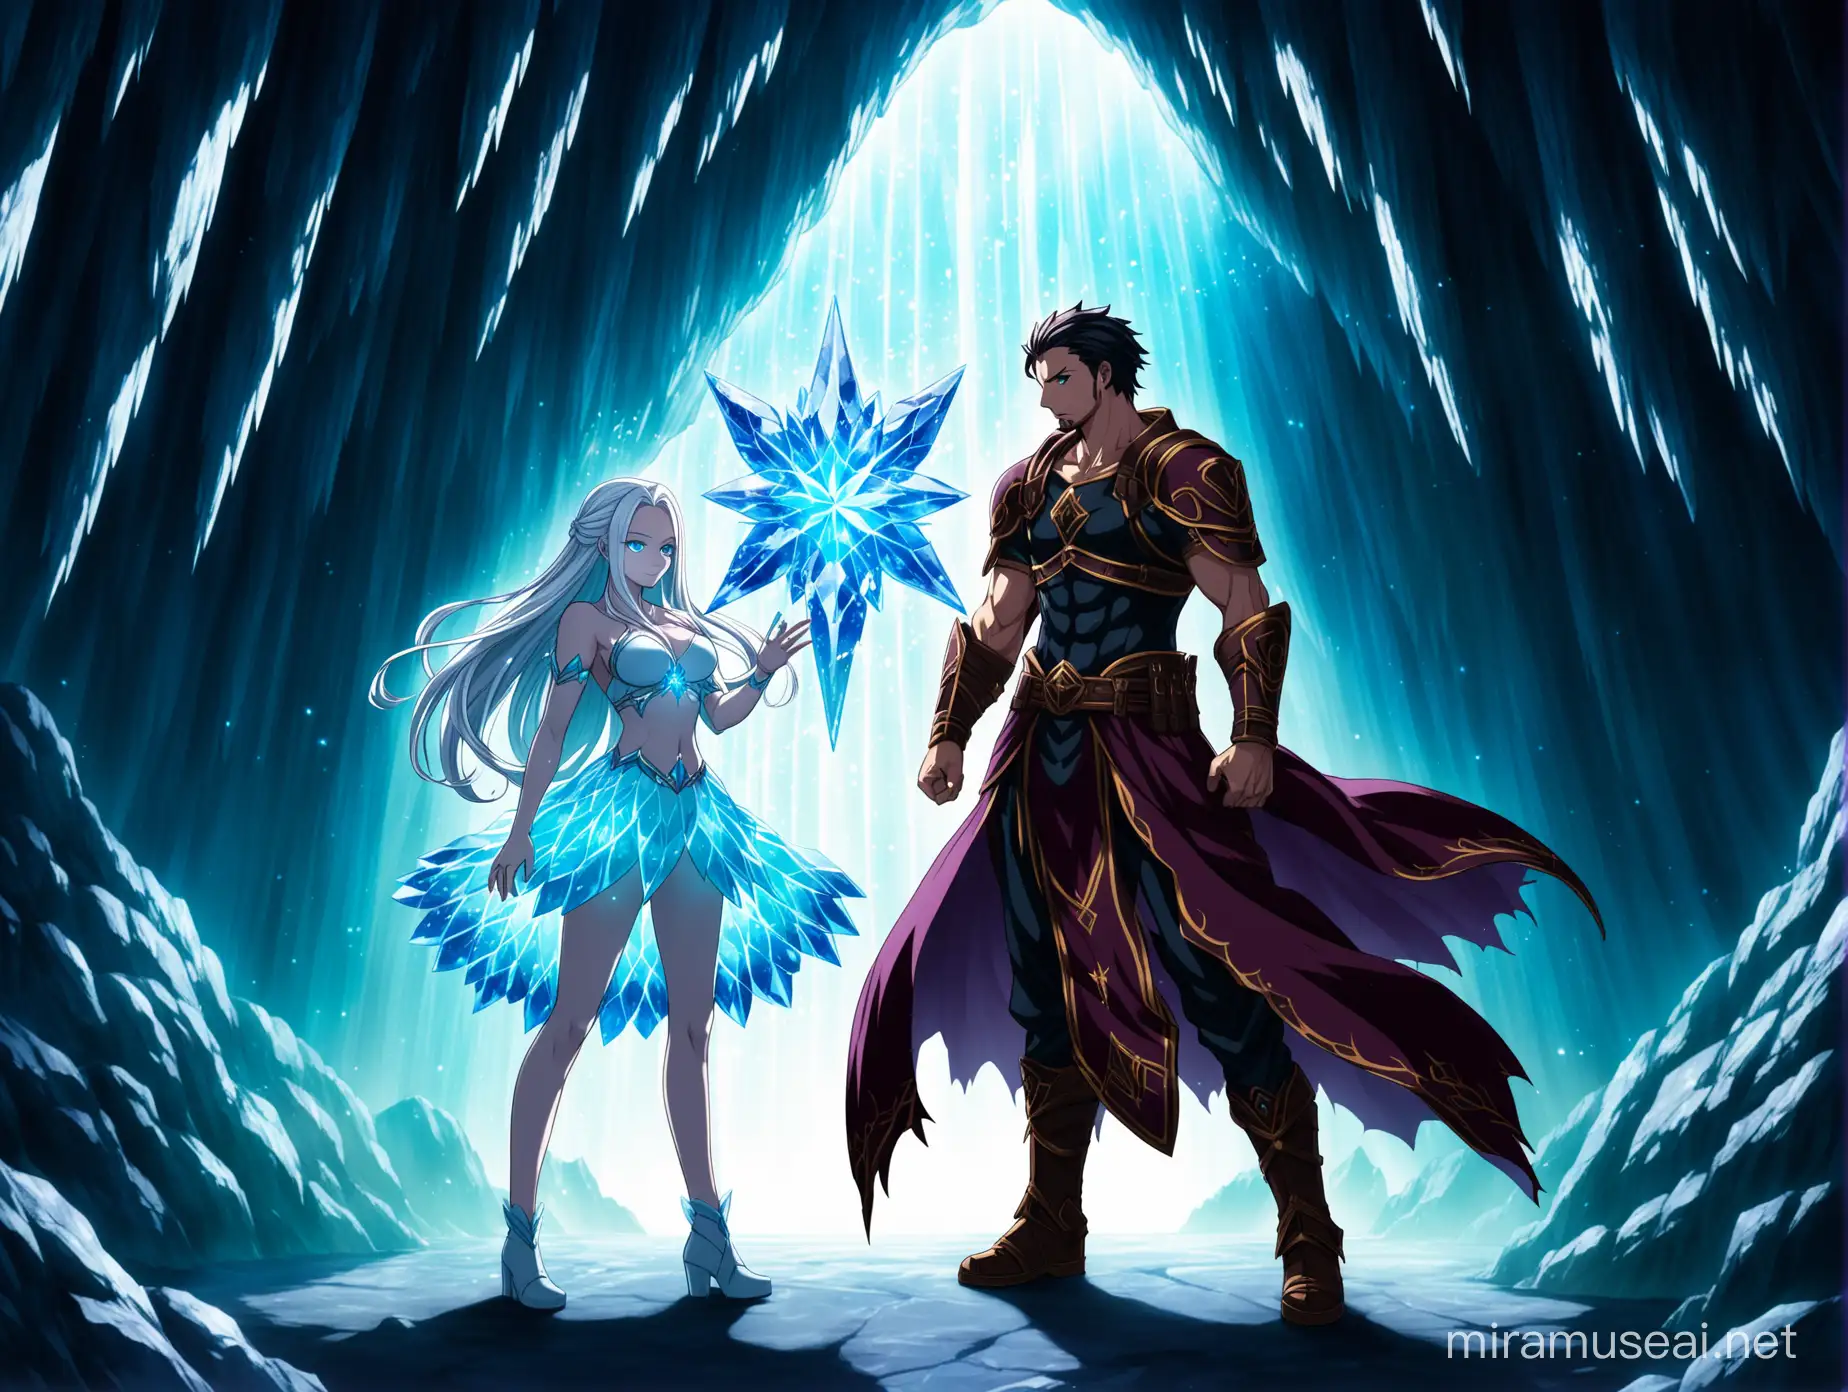 Mirajane Straus and Latin Warrior Guarding Blue Crystal in Luminous Cave